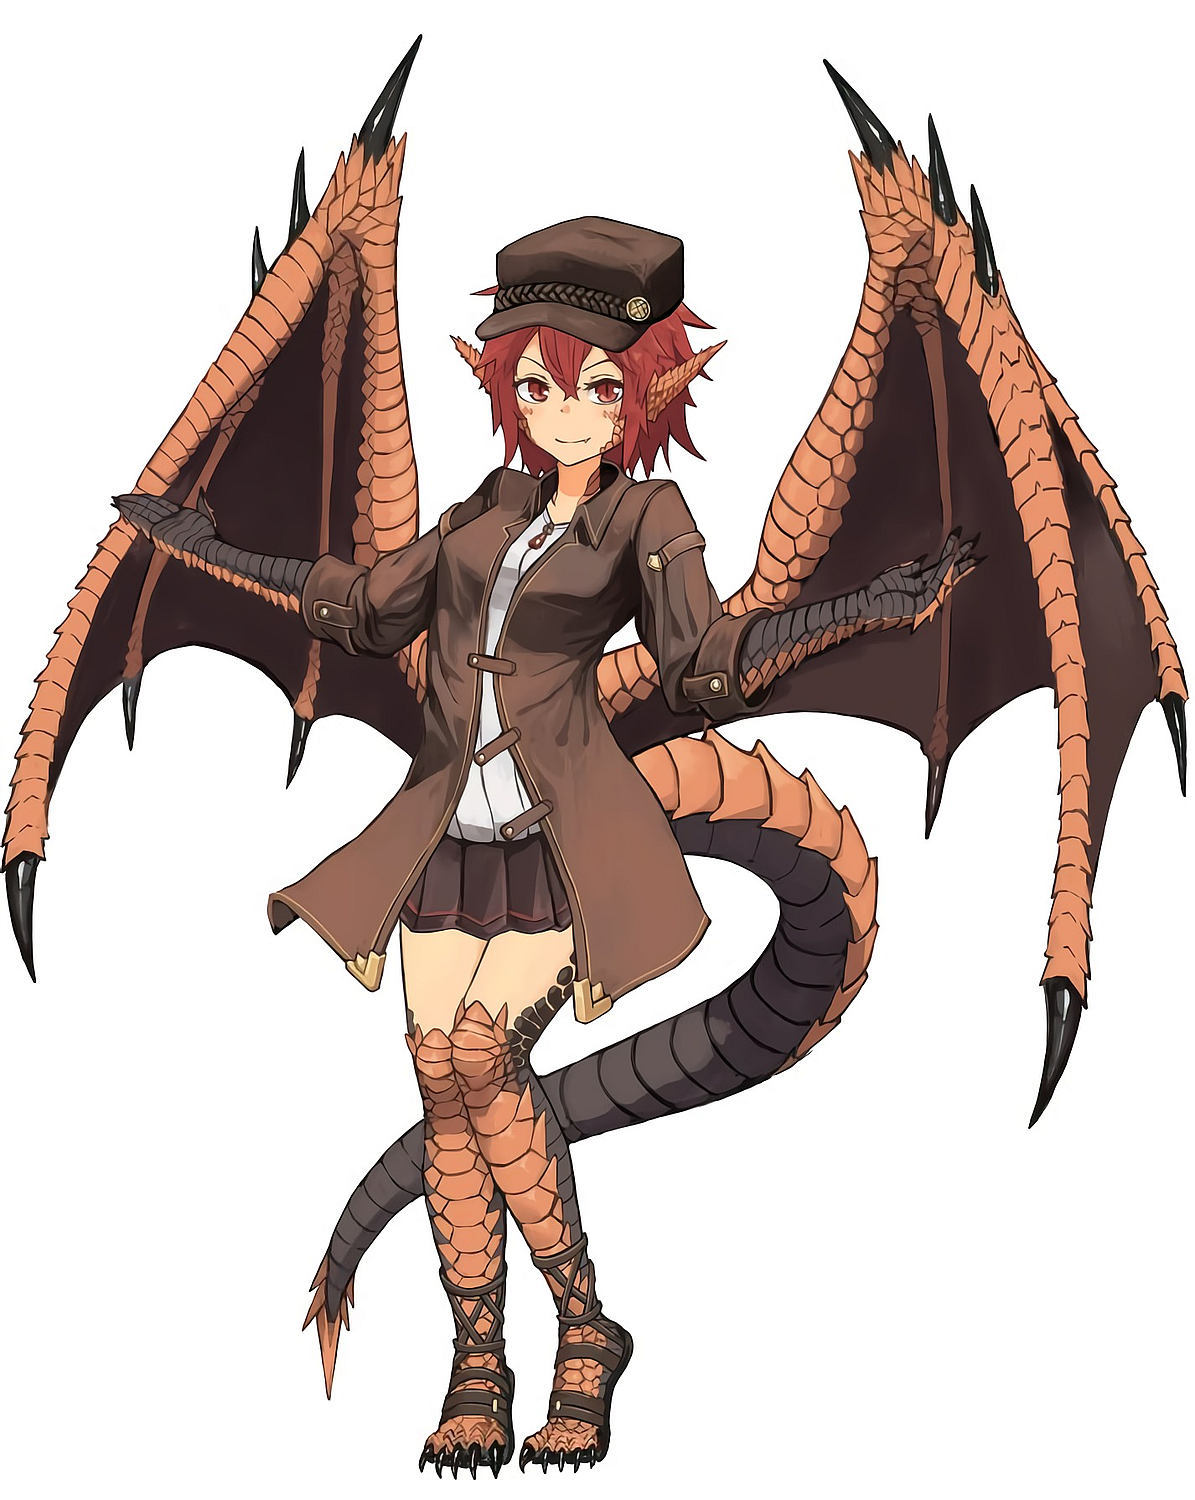 Best Dragon Girl Anime Characters Ranked By How Likely They Are To Eat You   The Mary Sue